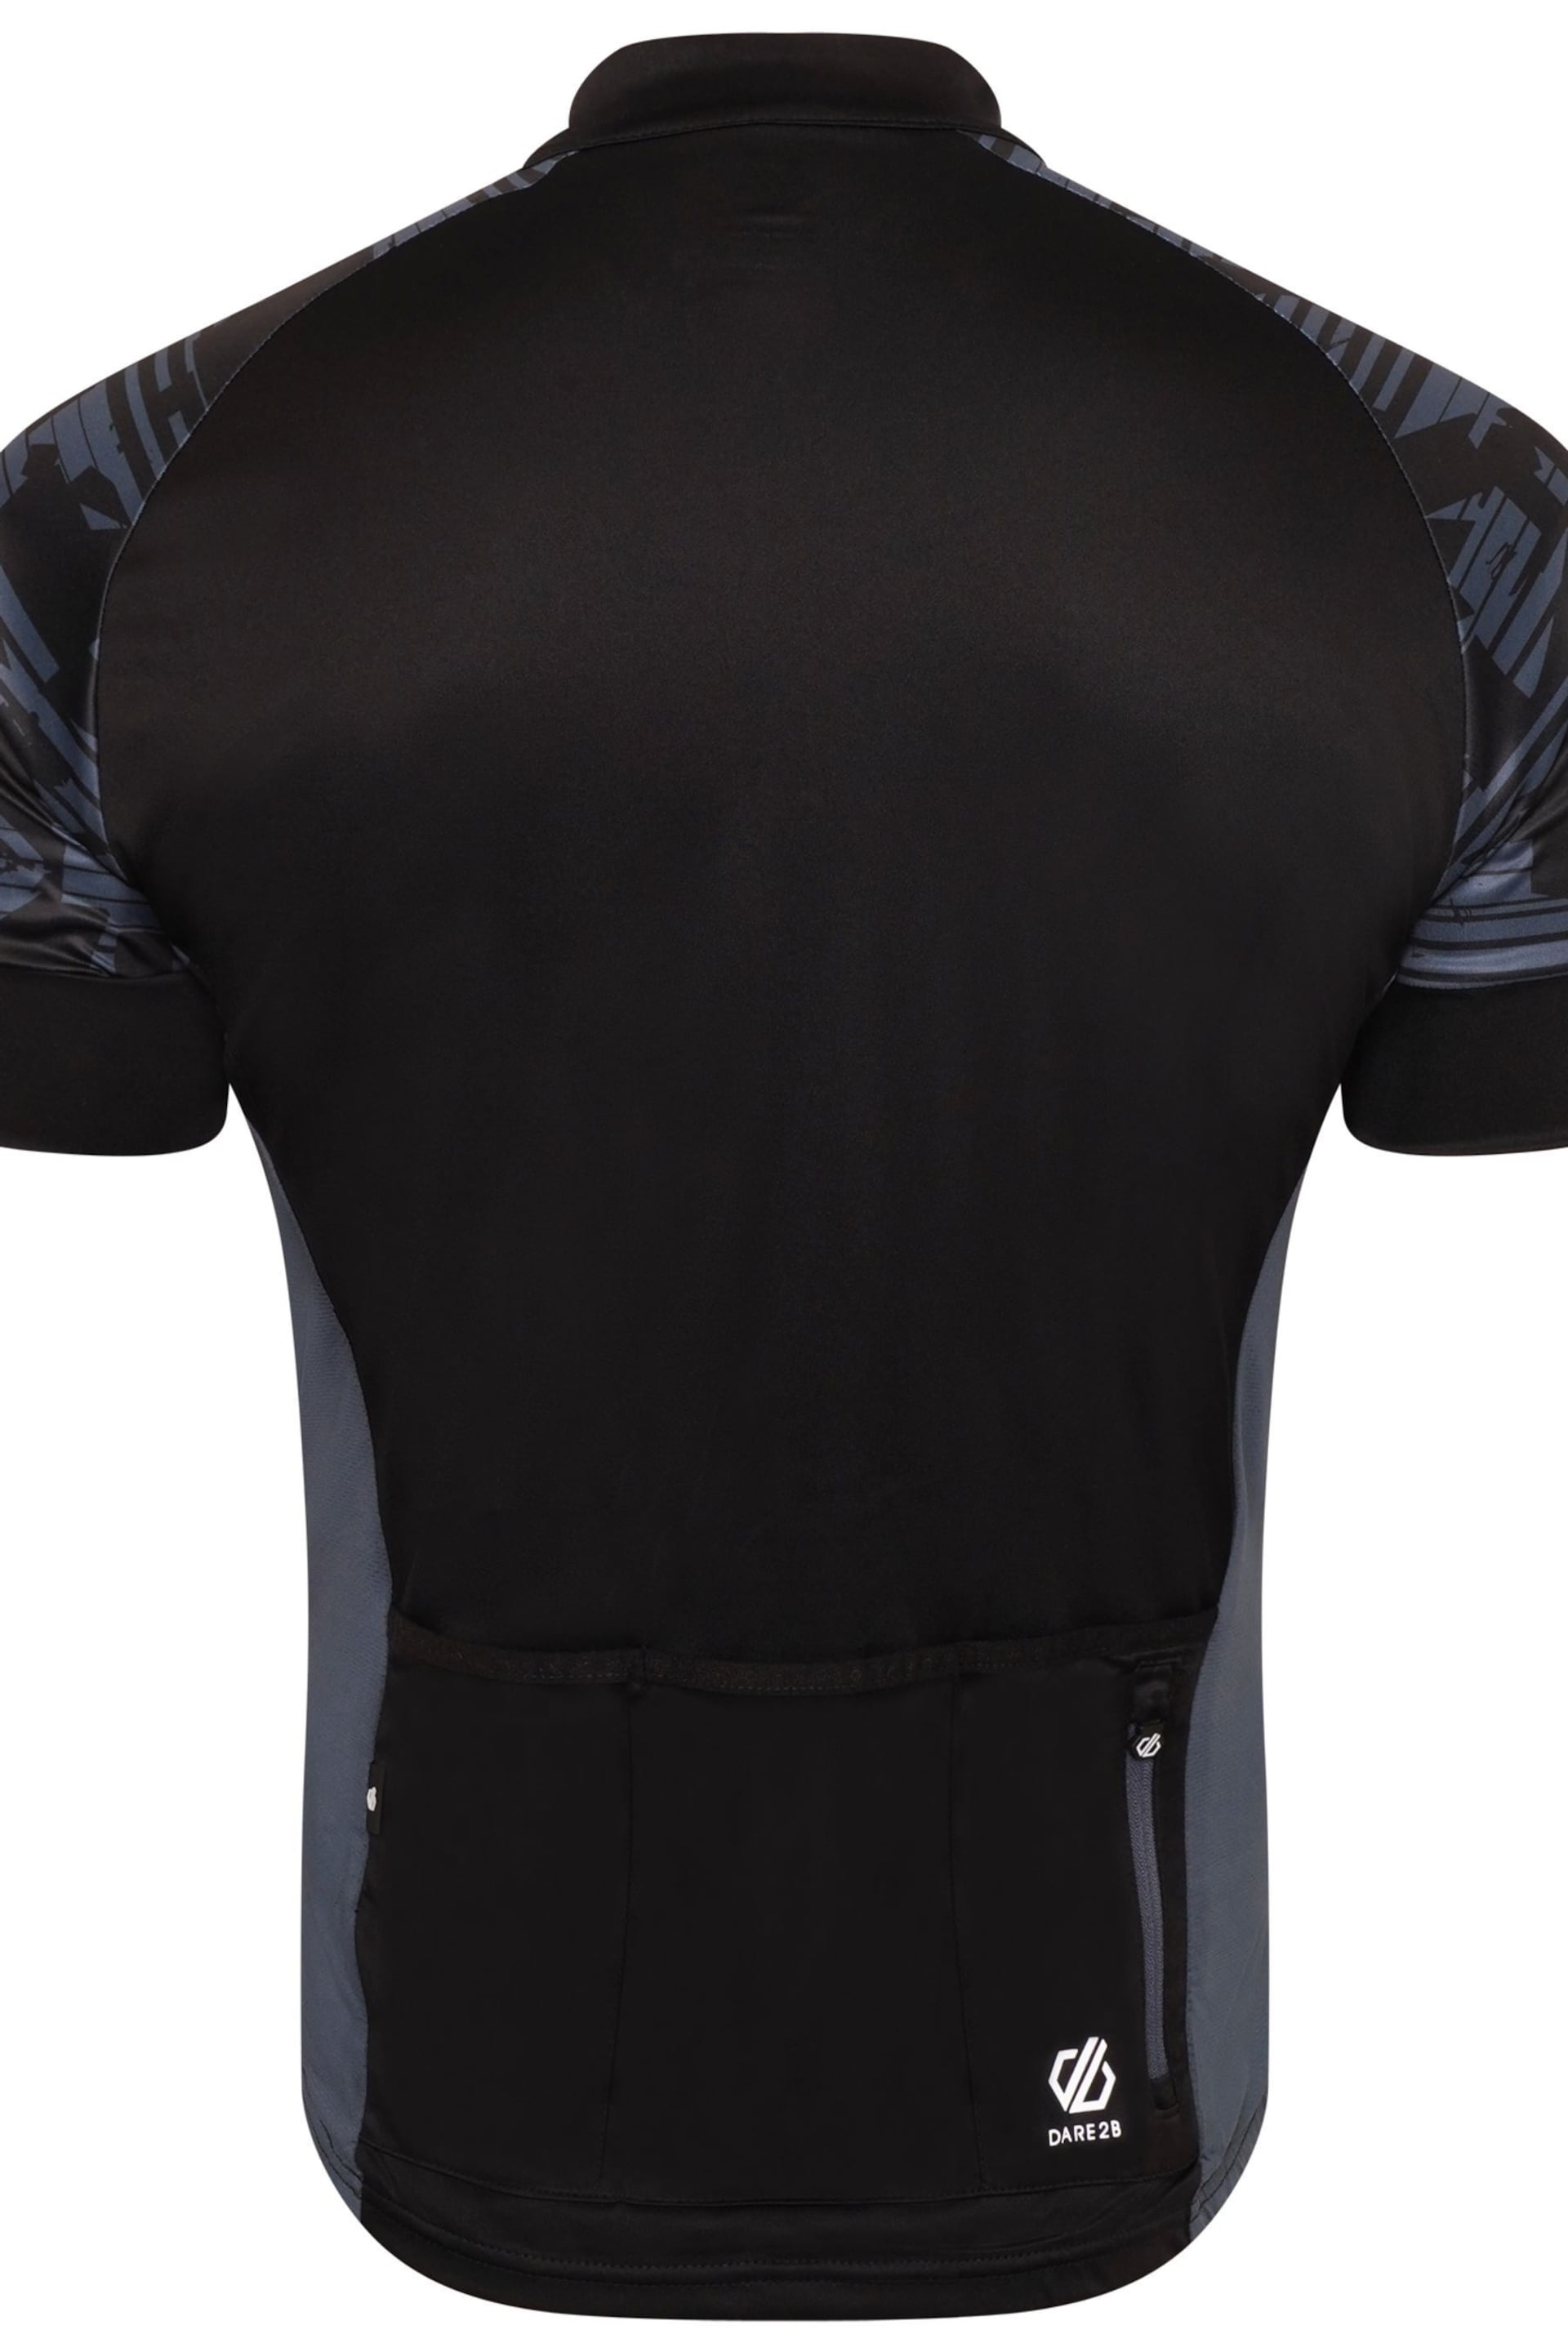 Dare 2b Stay The Course II Black Jersey - Image 3 of 3